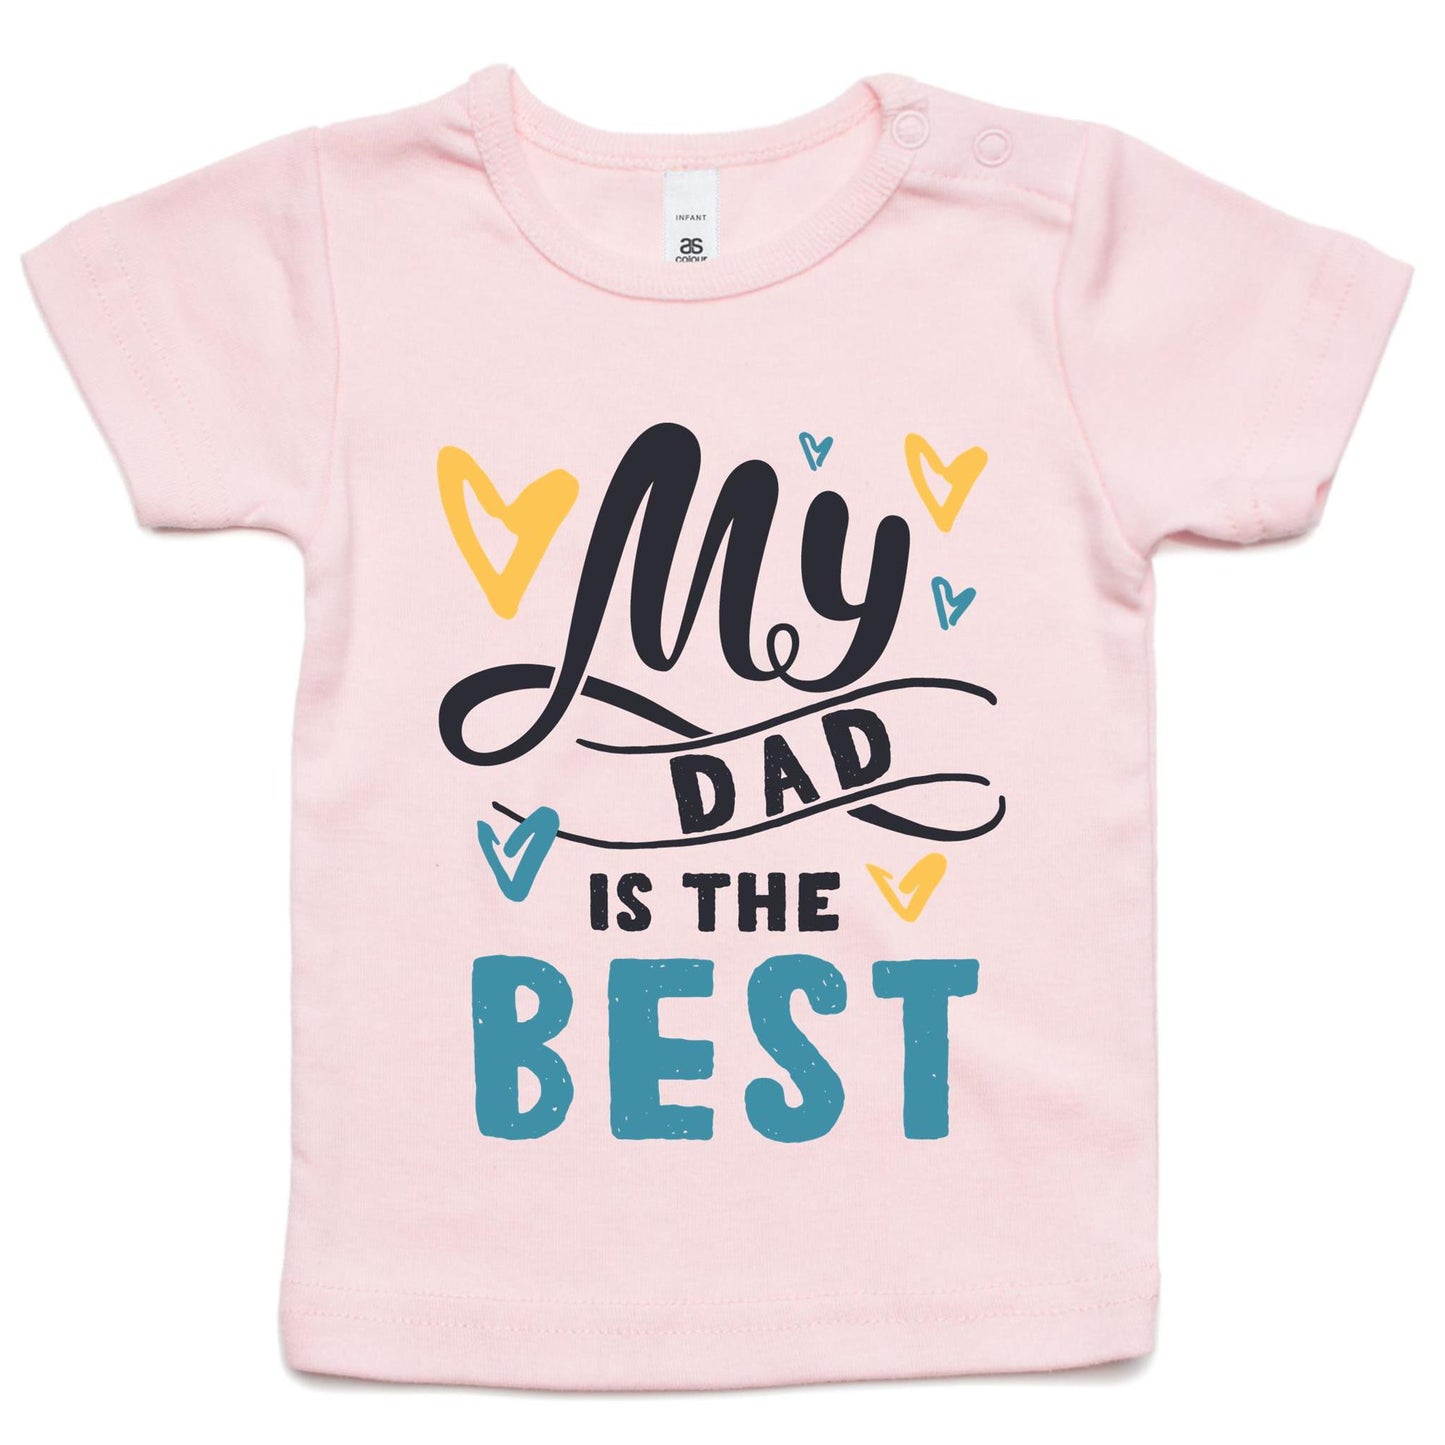 My Dad Is The Best - Baby T-shirt Pink Baby T-shirt Dad